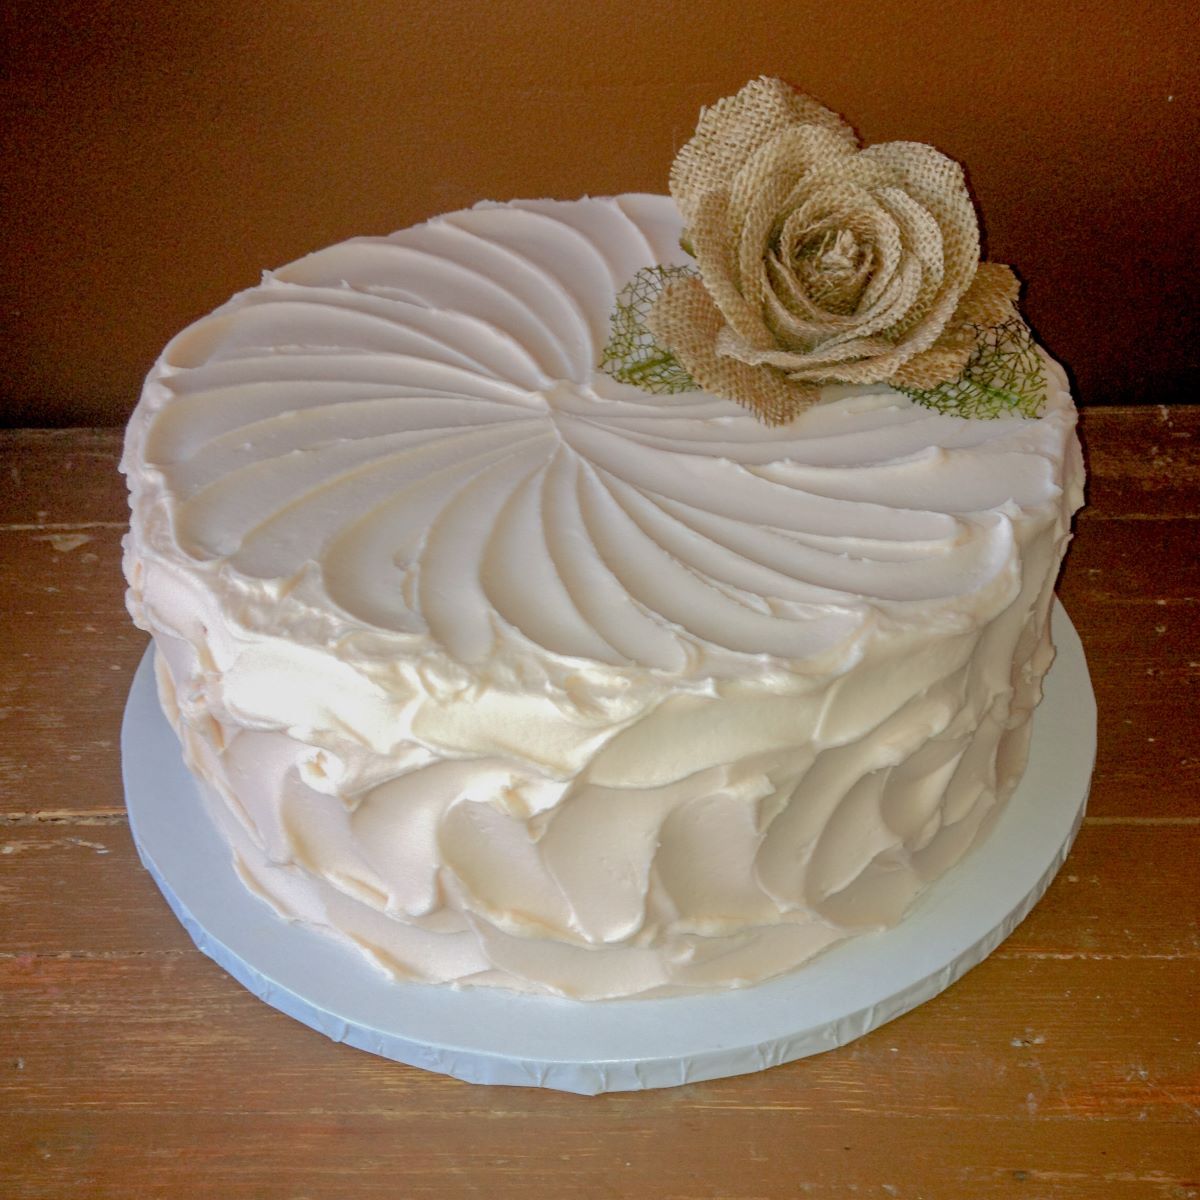 A cake with a simple white textured frosting.